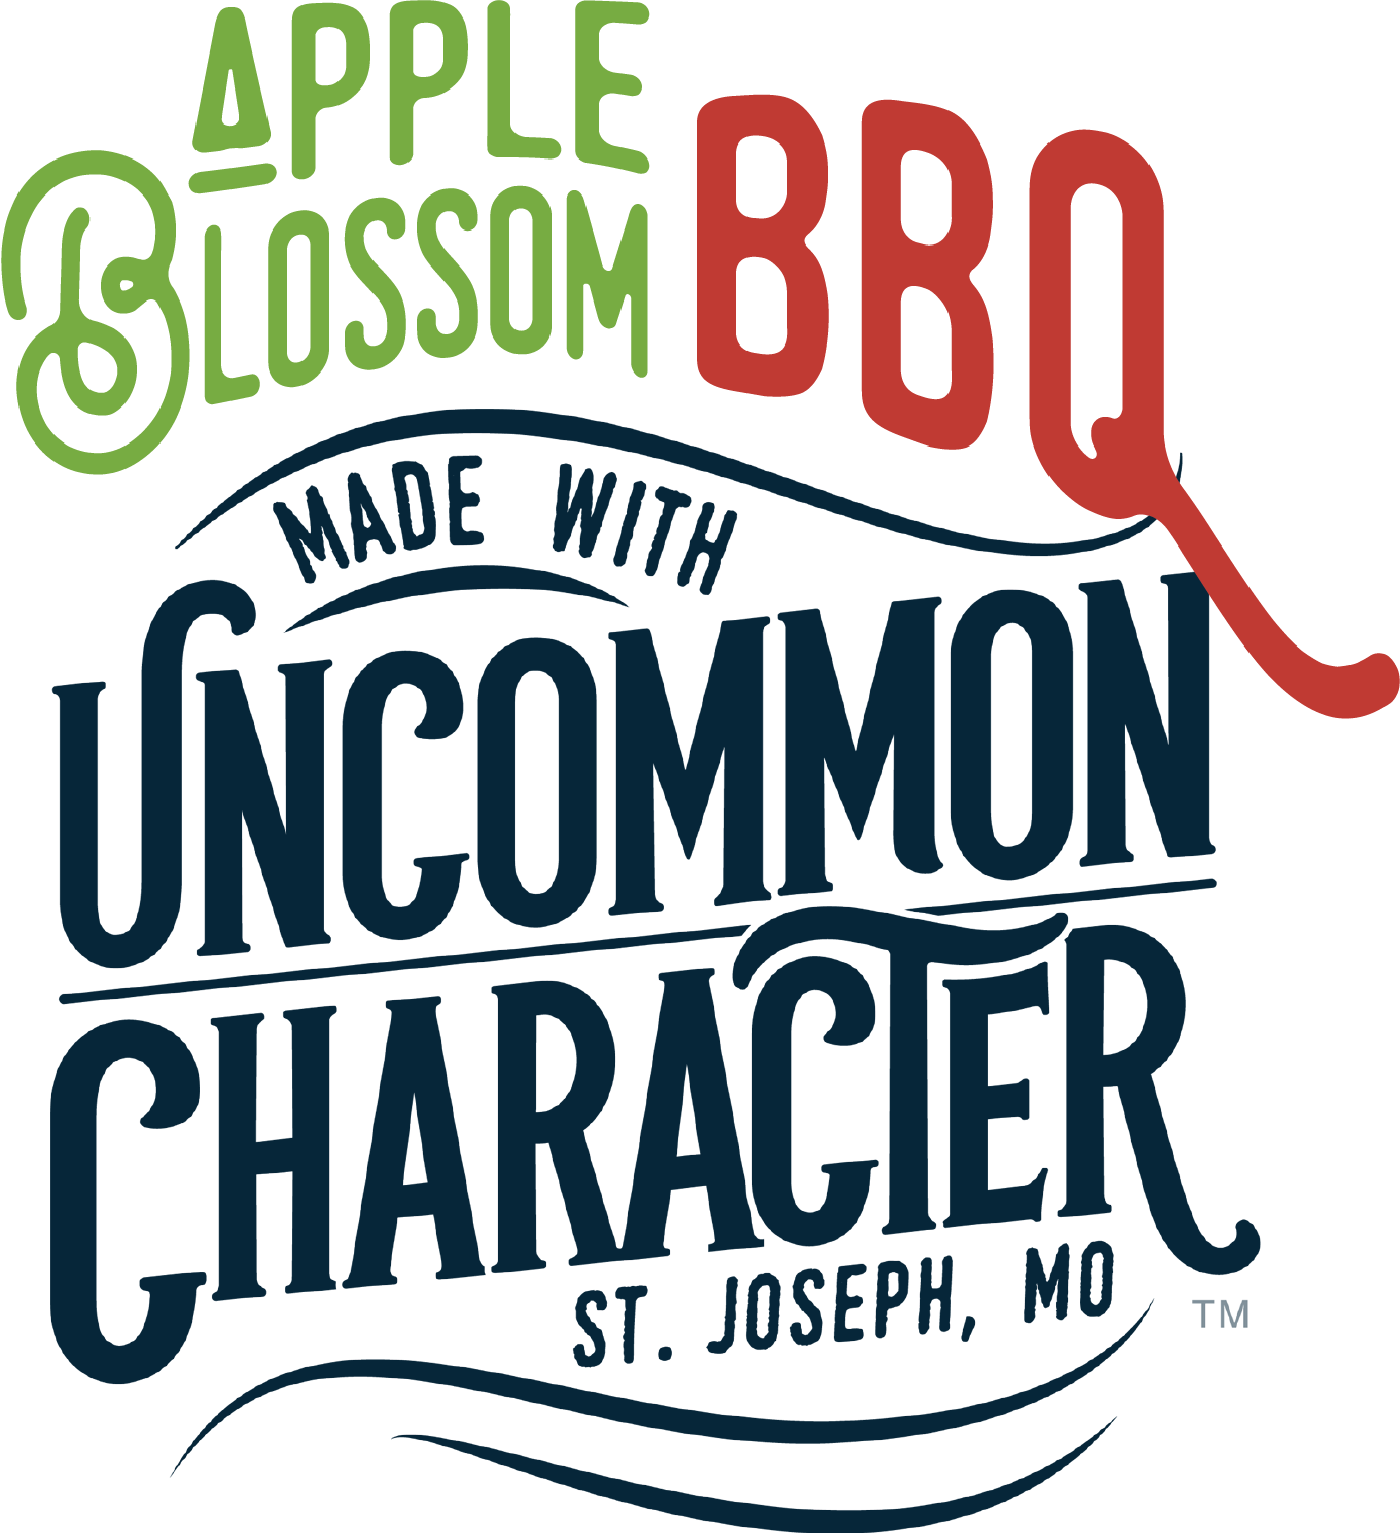 “made With Uncommon Character” Campaign Leading Apple - Brand Community (1400x1533)